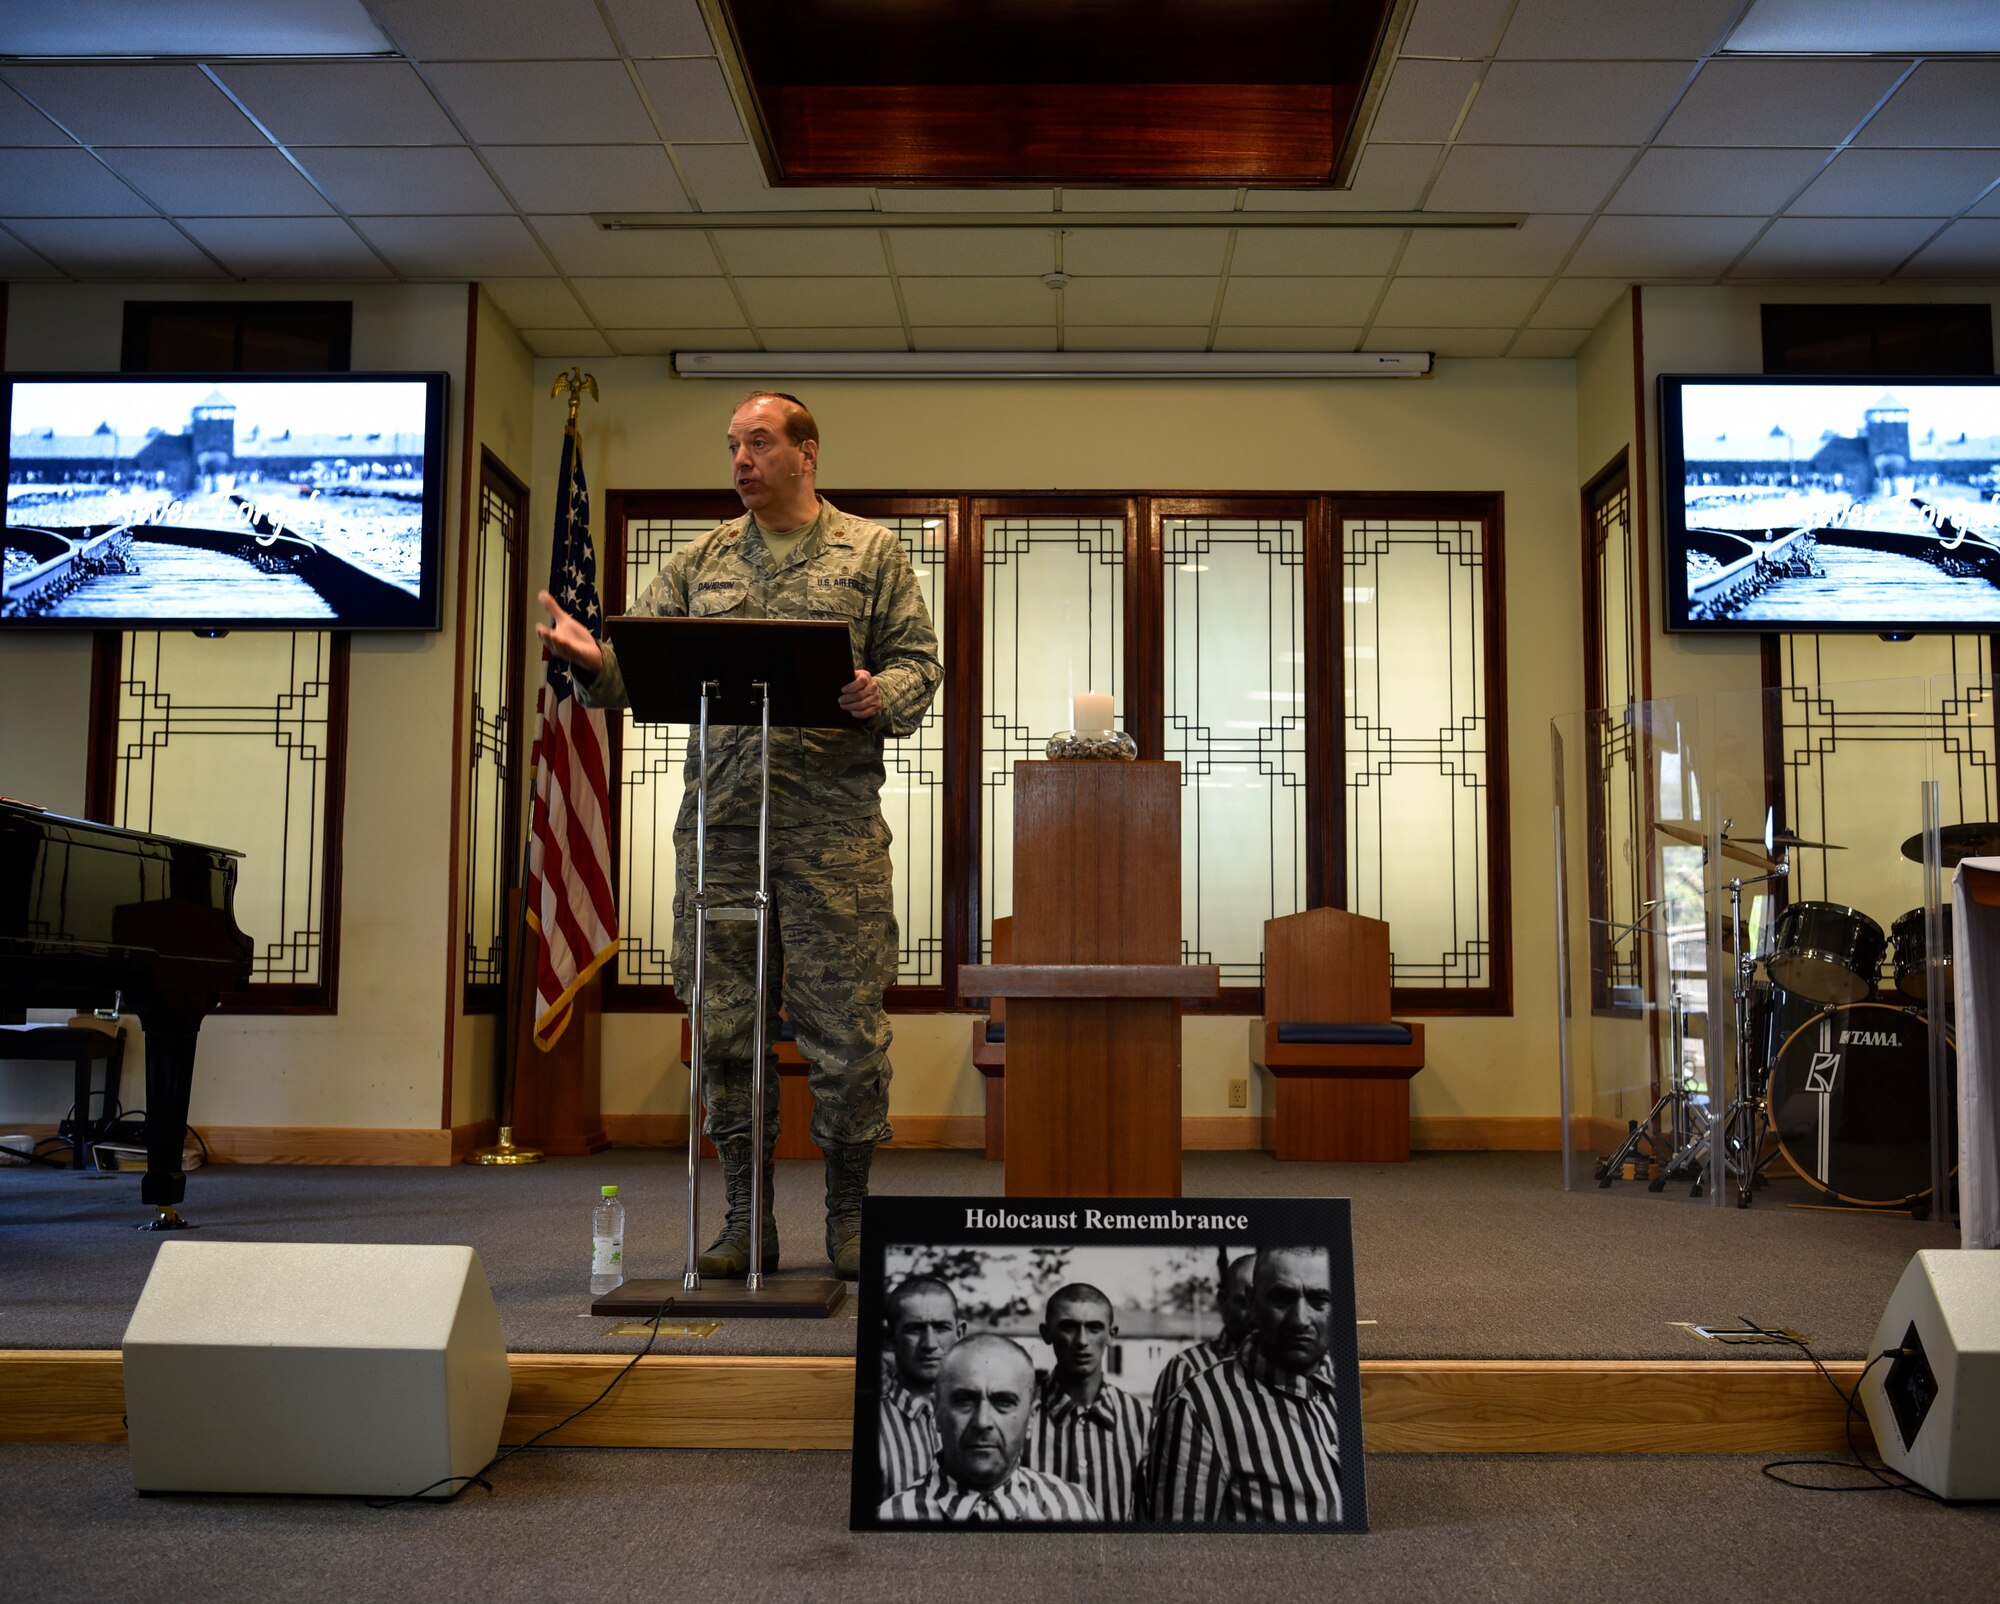 Rabbi (Maj.) Gary Davidson, U.S. Air Force chaplain, shares how he learned of the Holocaust during a remembrance ceremony on Kunsan Air Base, Republic of Korea, May 2, 2019. Davidson served as the ceremony’s keynote speaker. He detailed the history of the Holocaust through the eyes of a Jew and charged participates to continue to tell the story of the atrocious genocide so it is not forgotten or repeated.  (U.S. Air Force photo by Capt. Remoshay Nelson